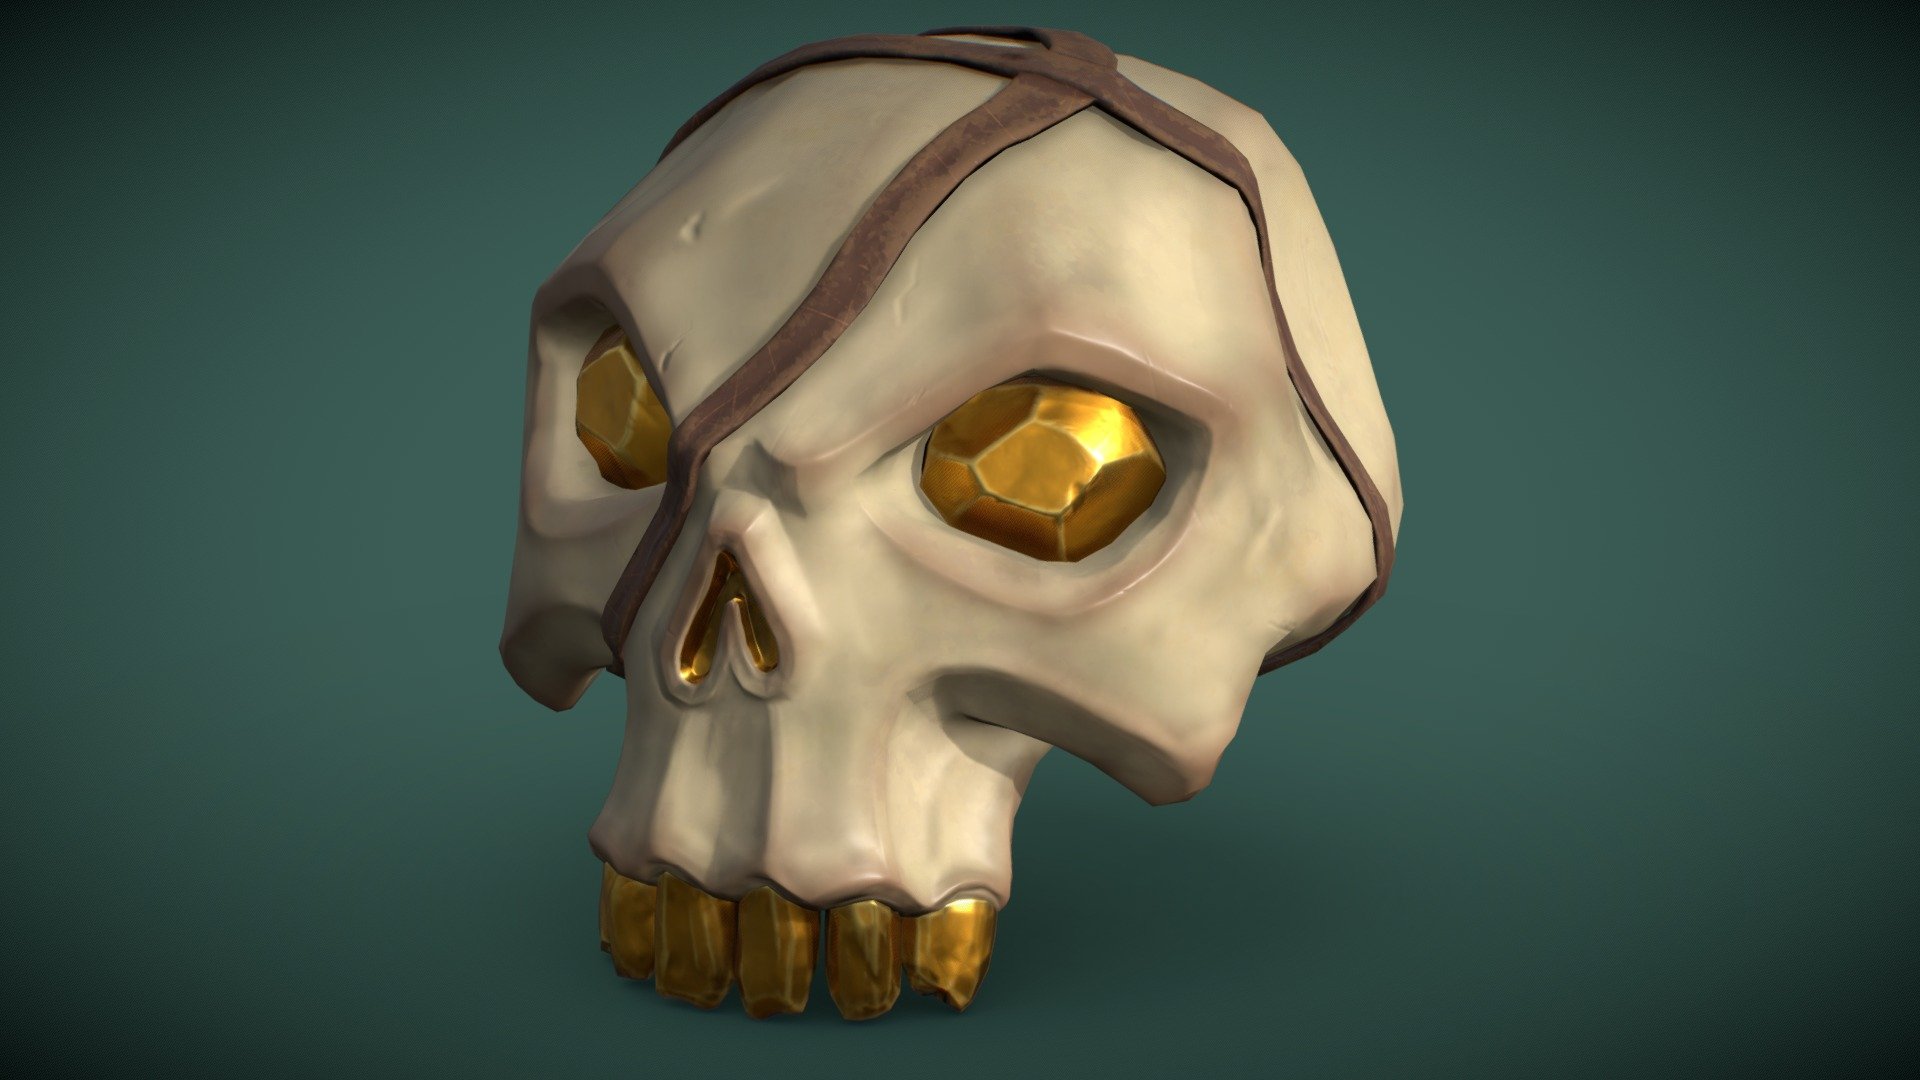 Inspired by Sea of Thieves



Long time ago,
he was a pirate who sailed the seas with his comrades in search of glory and riches, always challenging his luck. 



That's how he ended up here - being a treasure, as an accurate representation of his avarice and greed 3d model